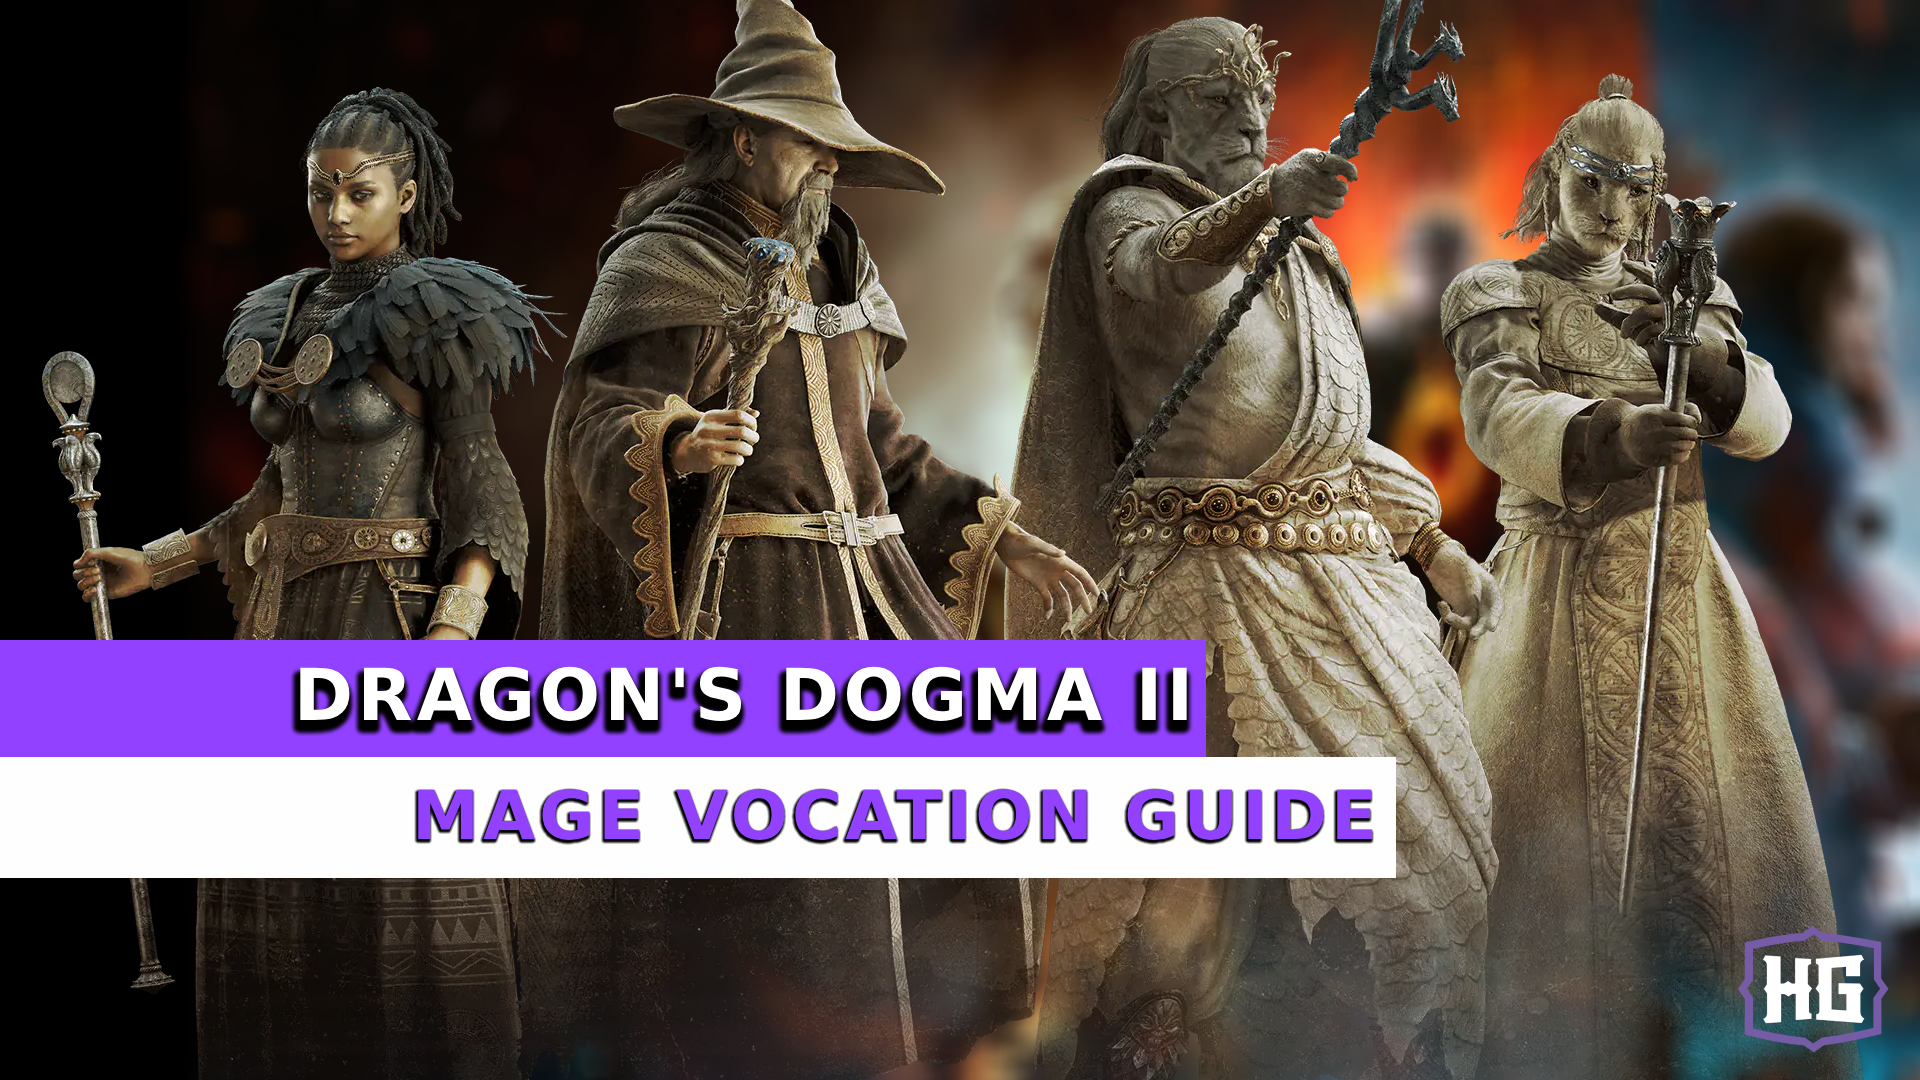 mage vocation guide dd2